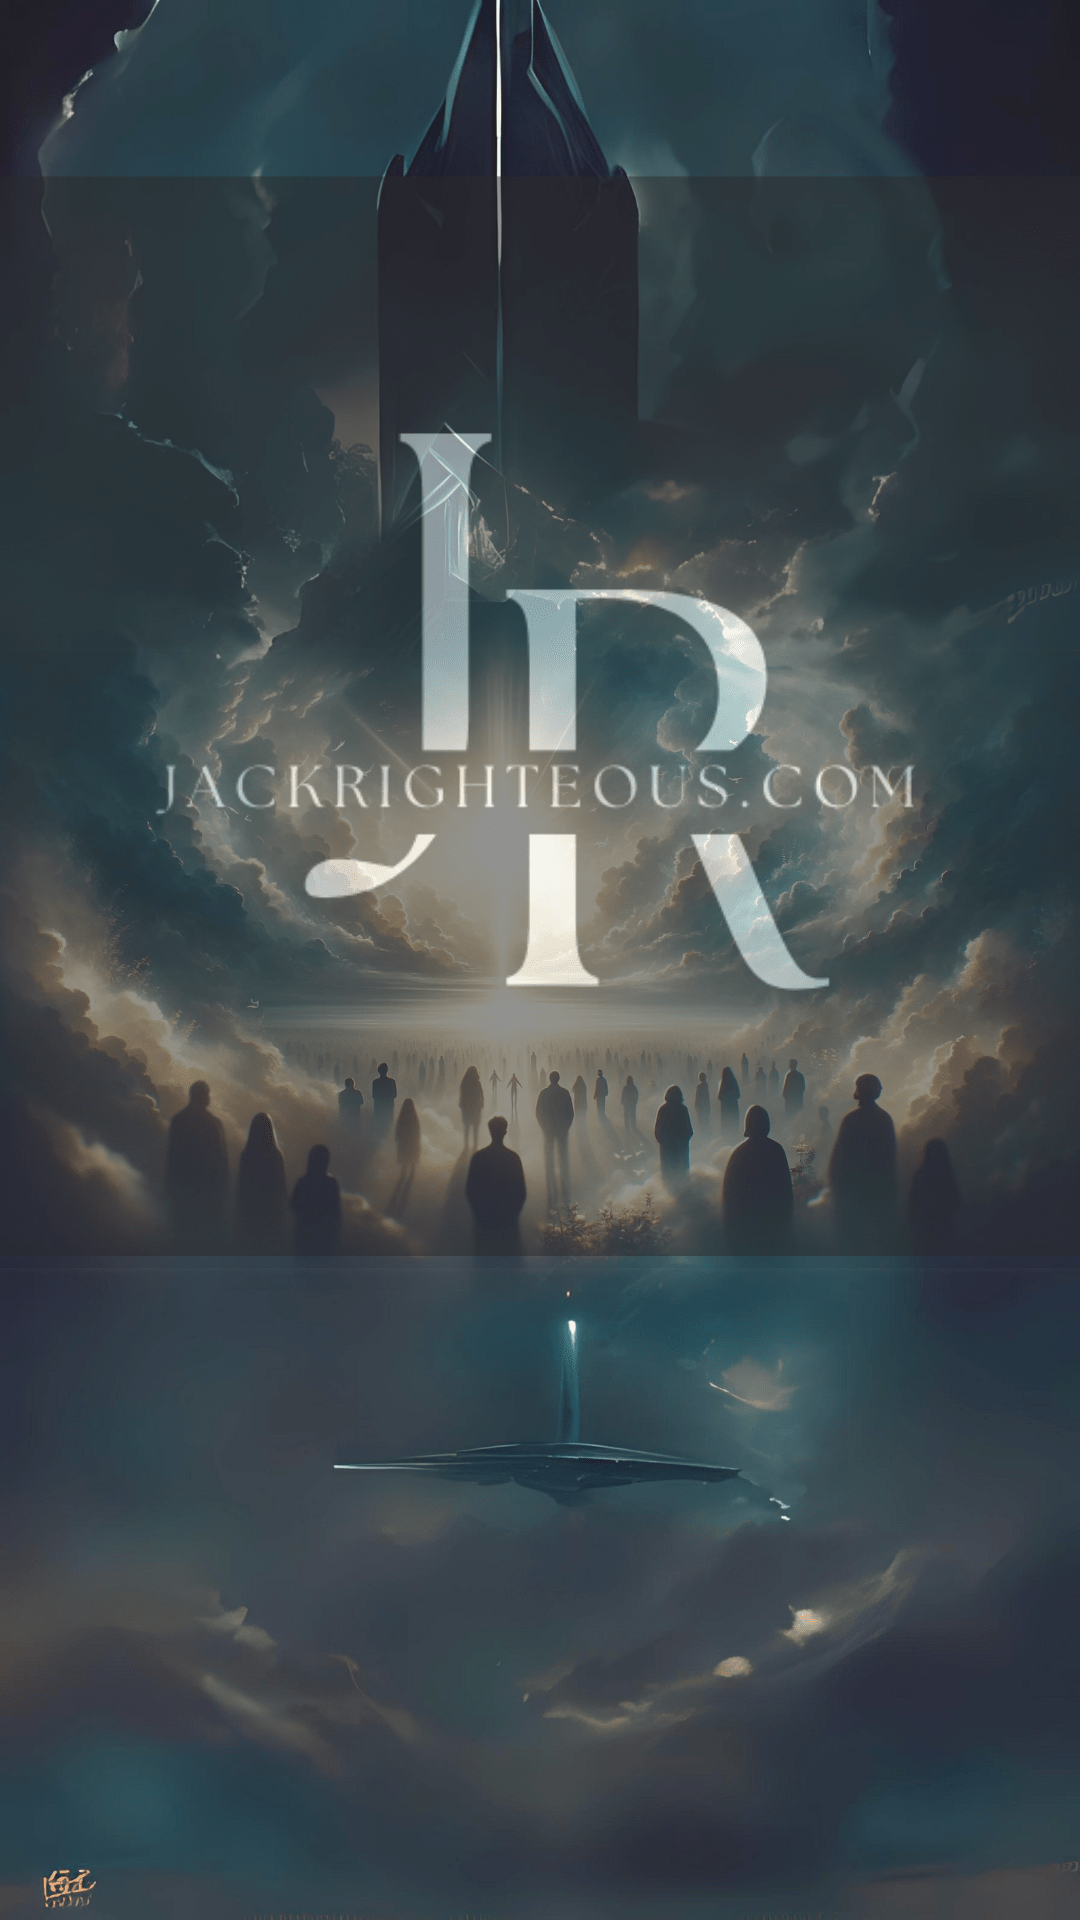 Eclectic Digital Art: Faith, Food, and More - Instant Downloads - Jack Righteous